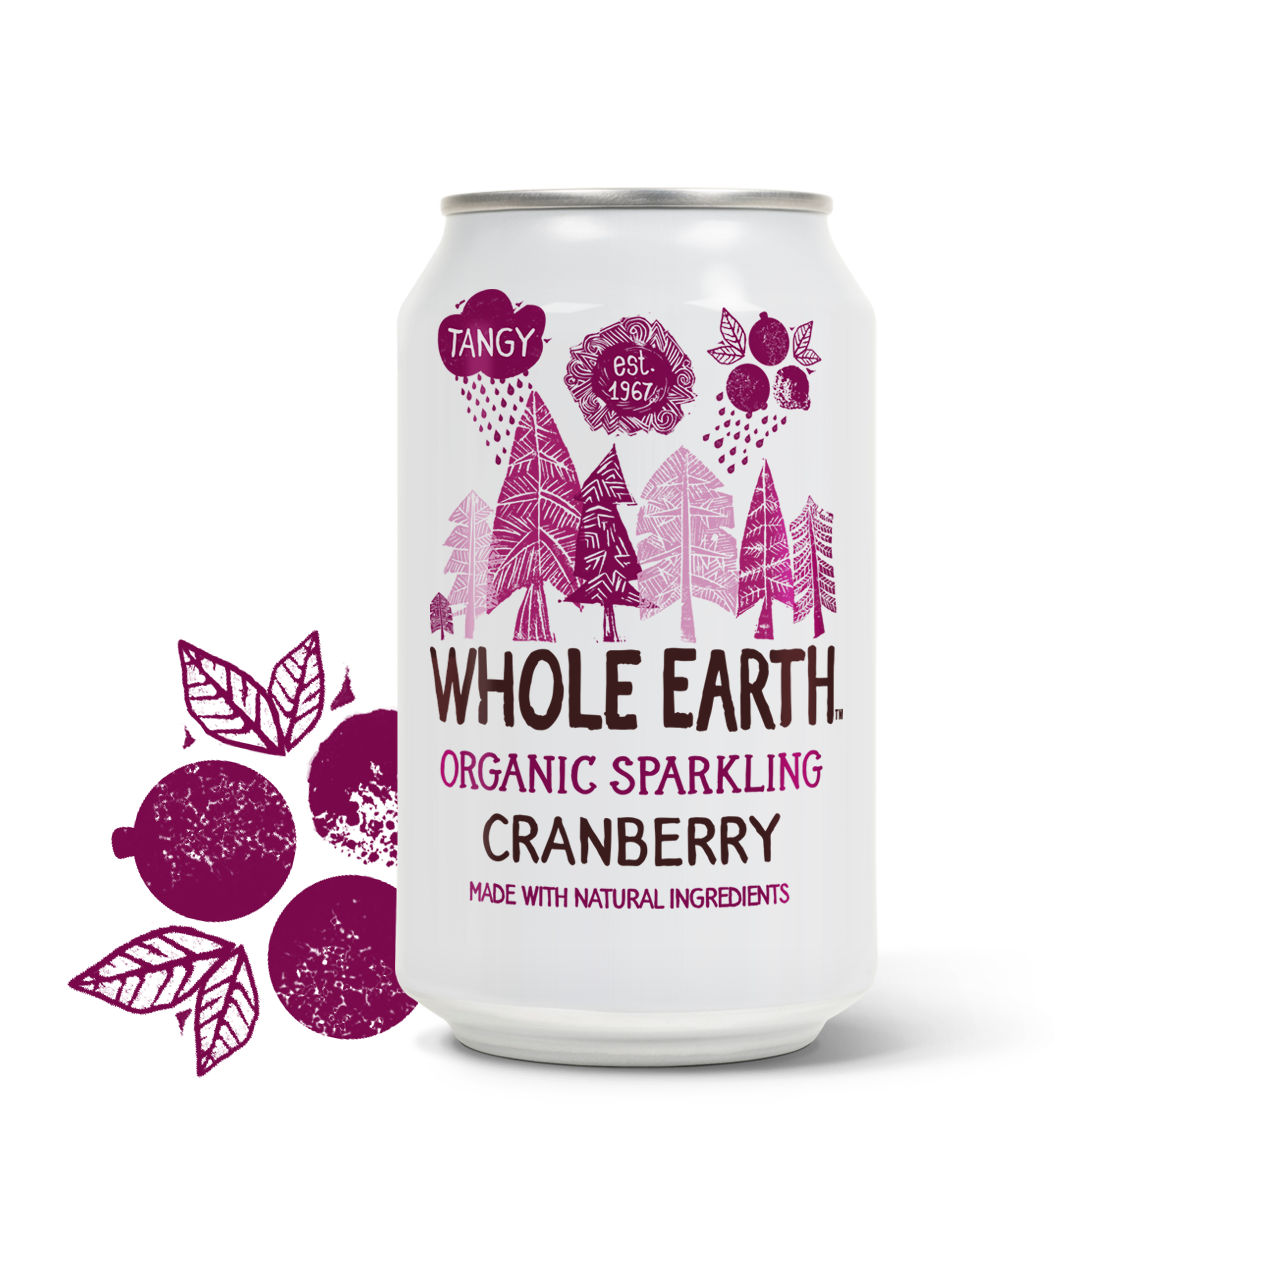 Whole Earth Organic Sparkling Cranberry Drink 330ml - Just Natural